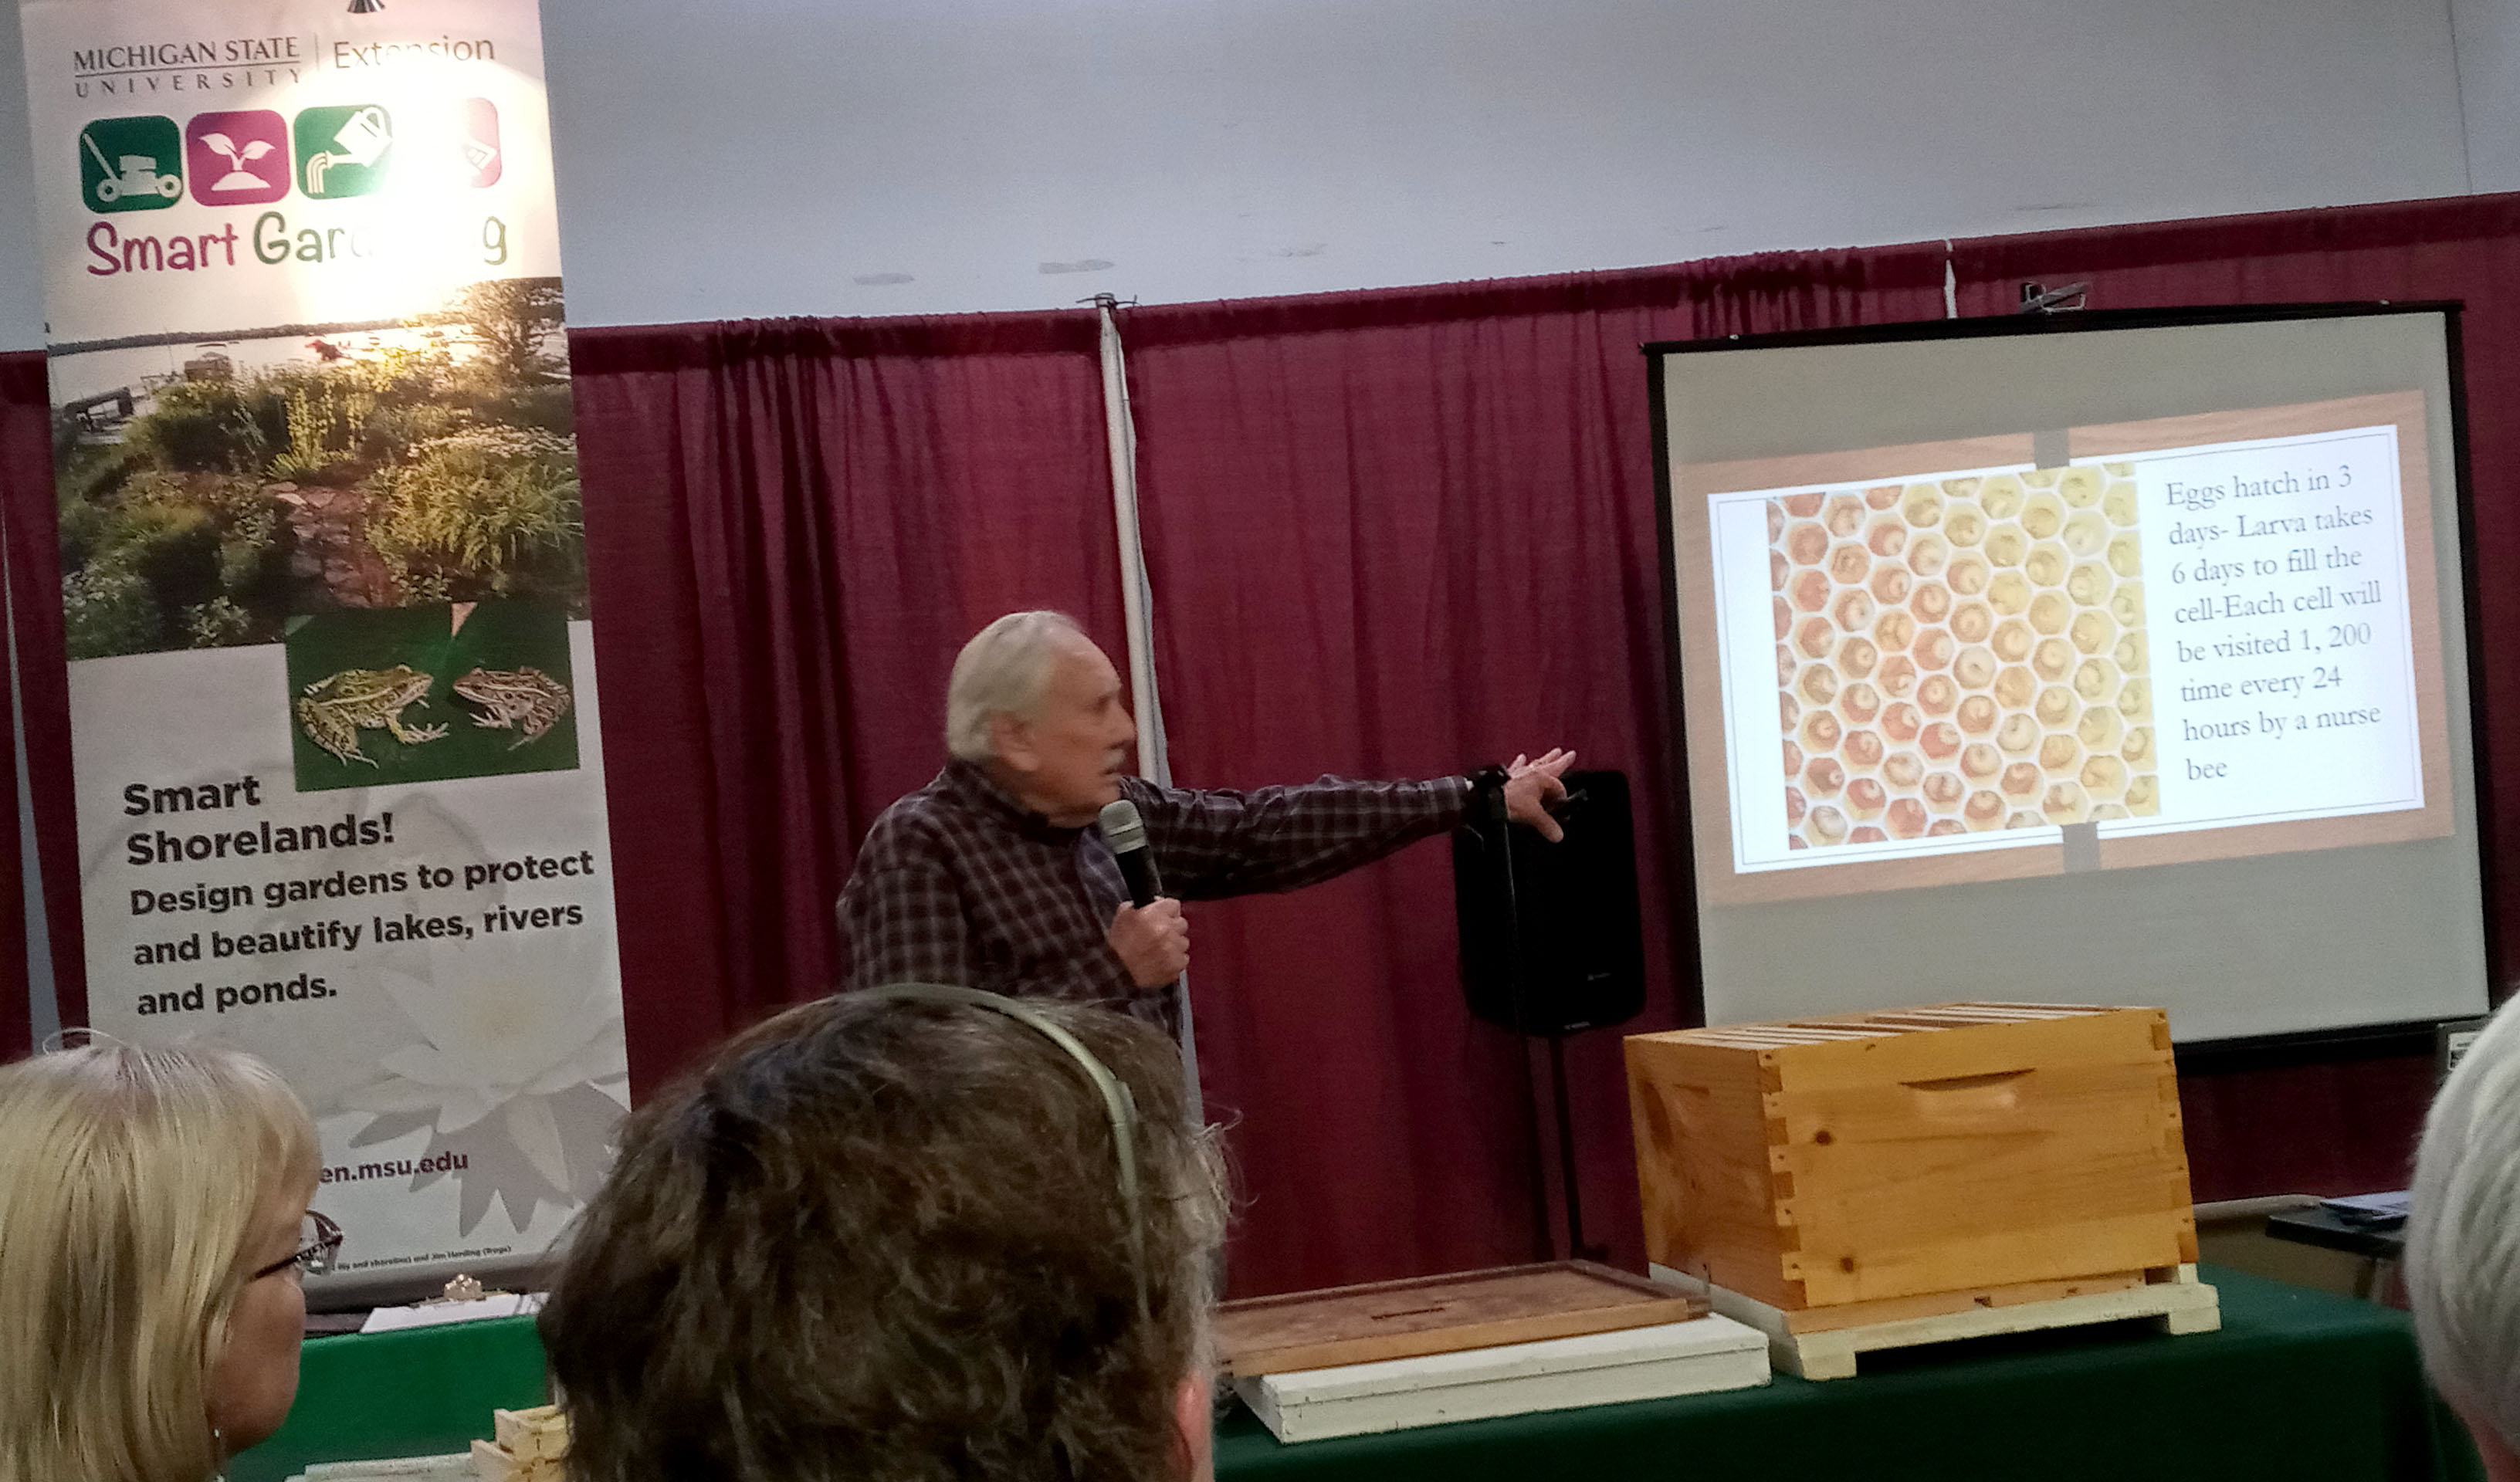 A man gives a presentation to a crowd on honey bees.